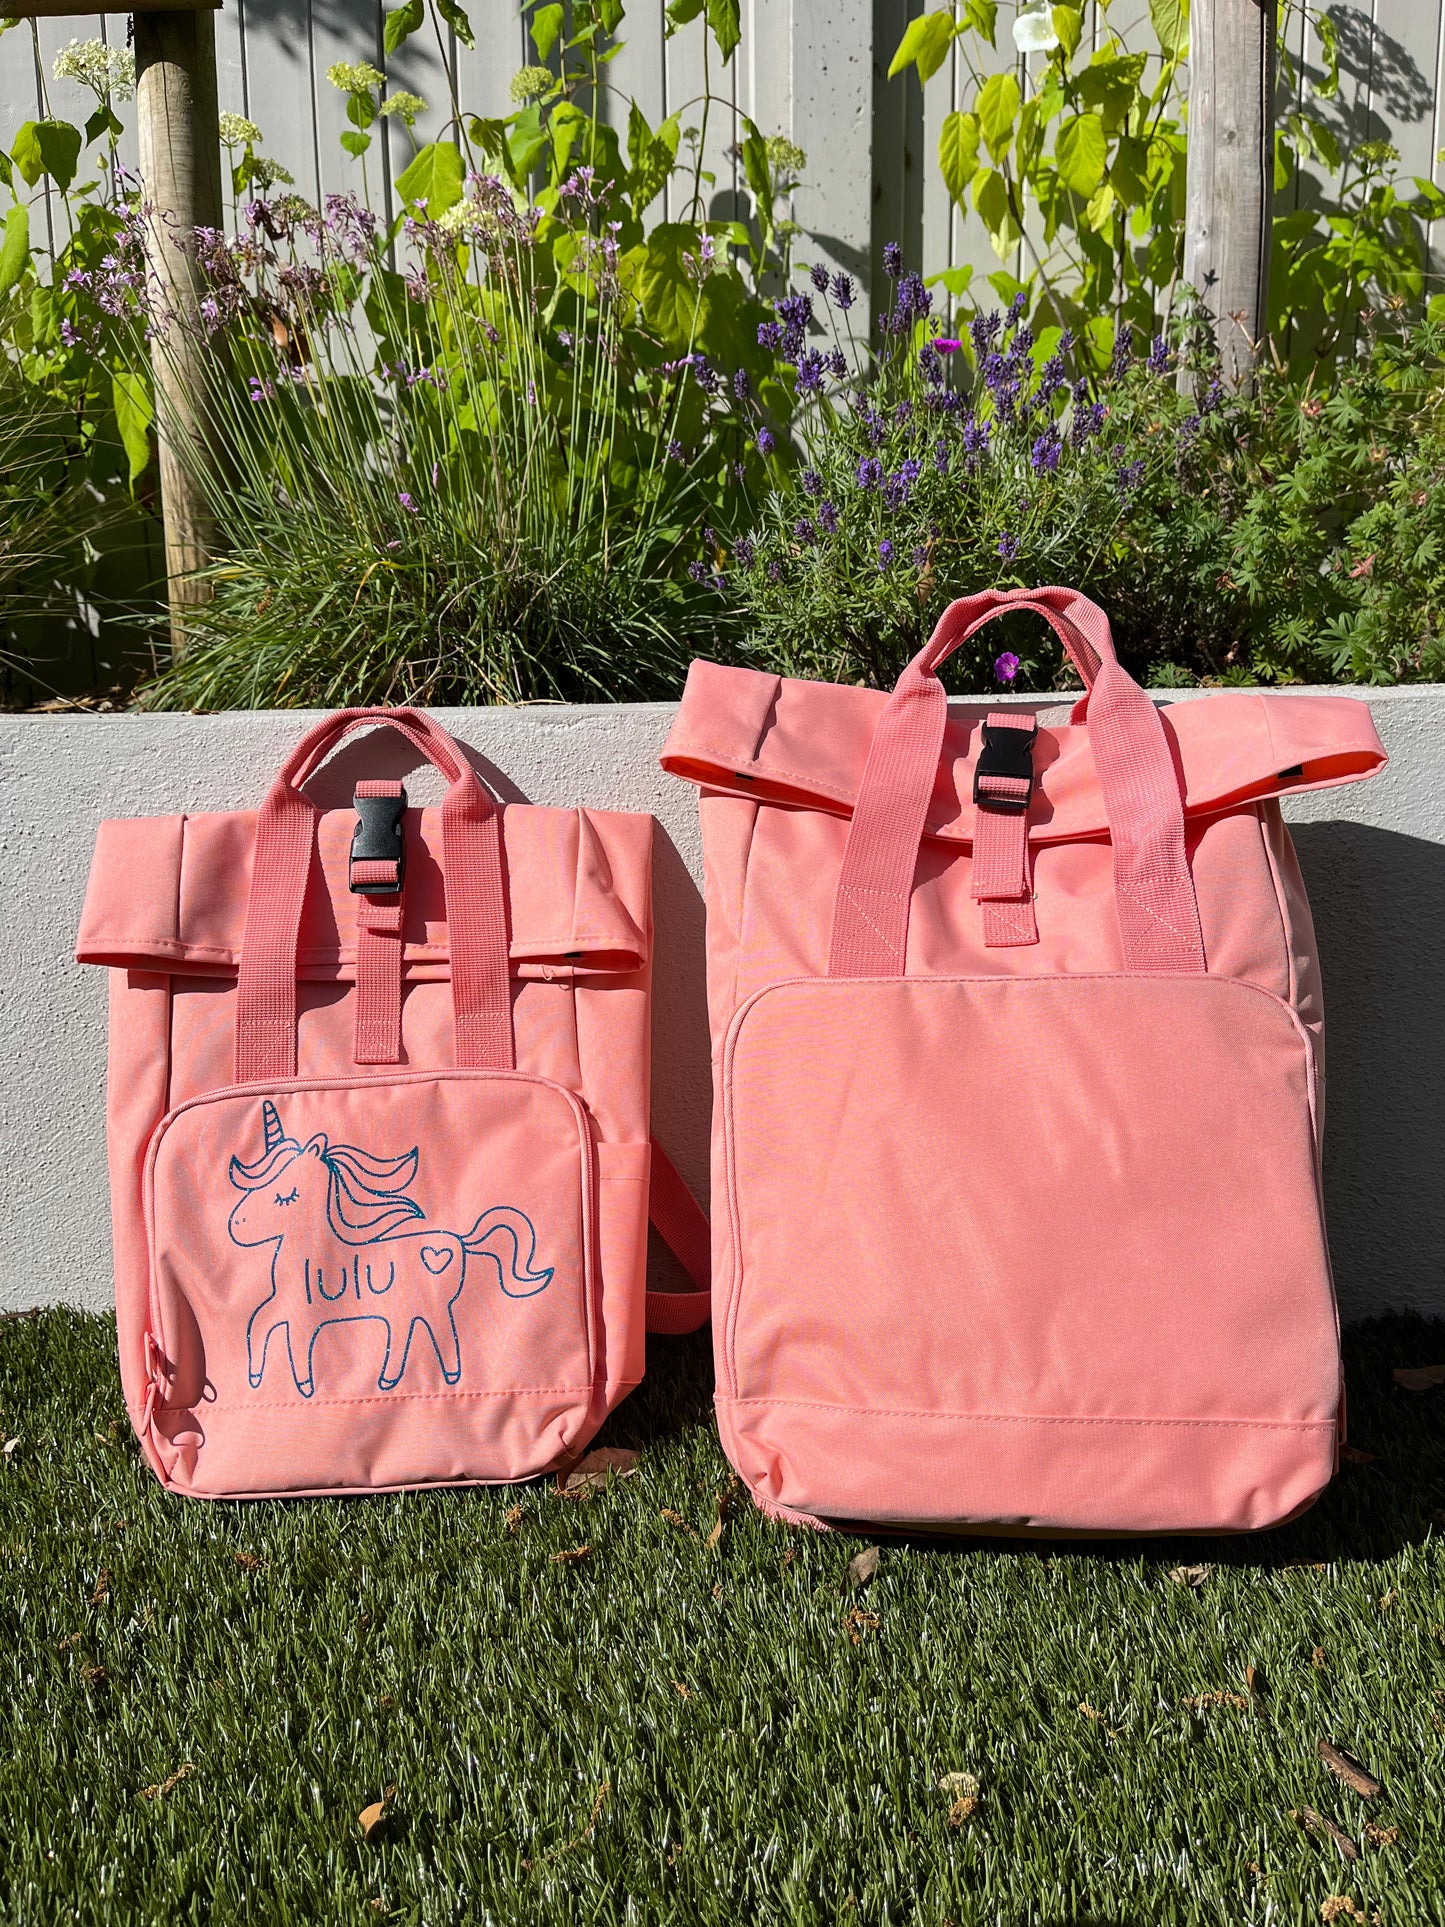 The Big Backpack - 100% Recycled Polyester